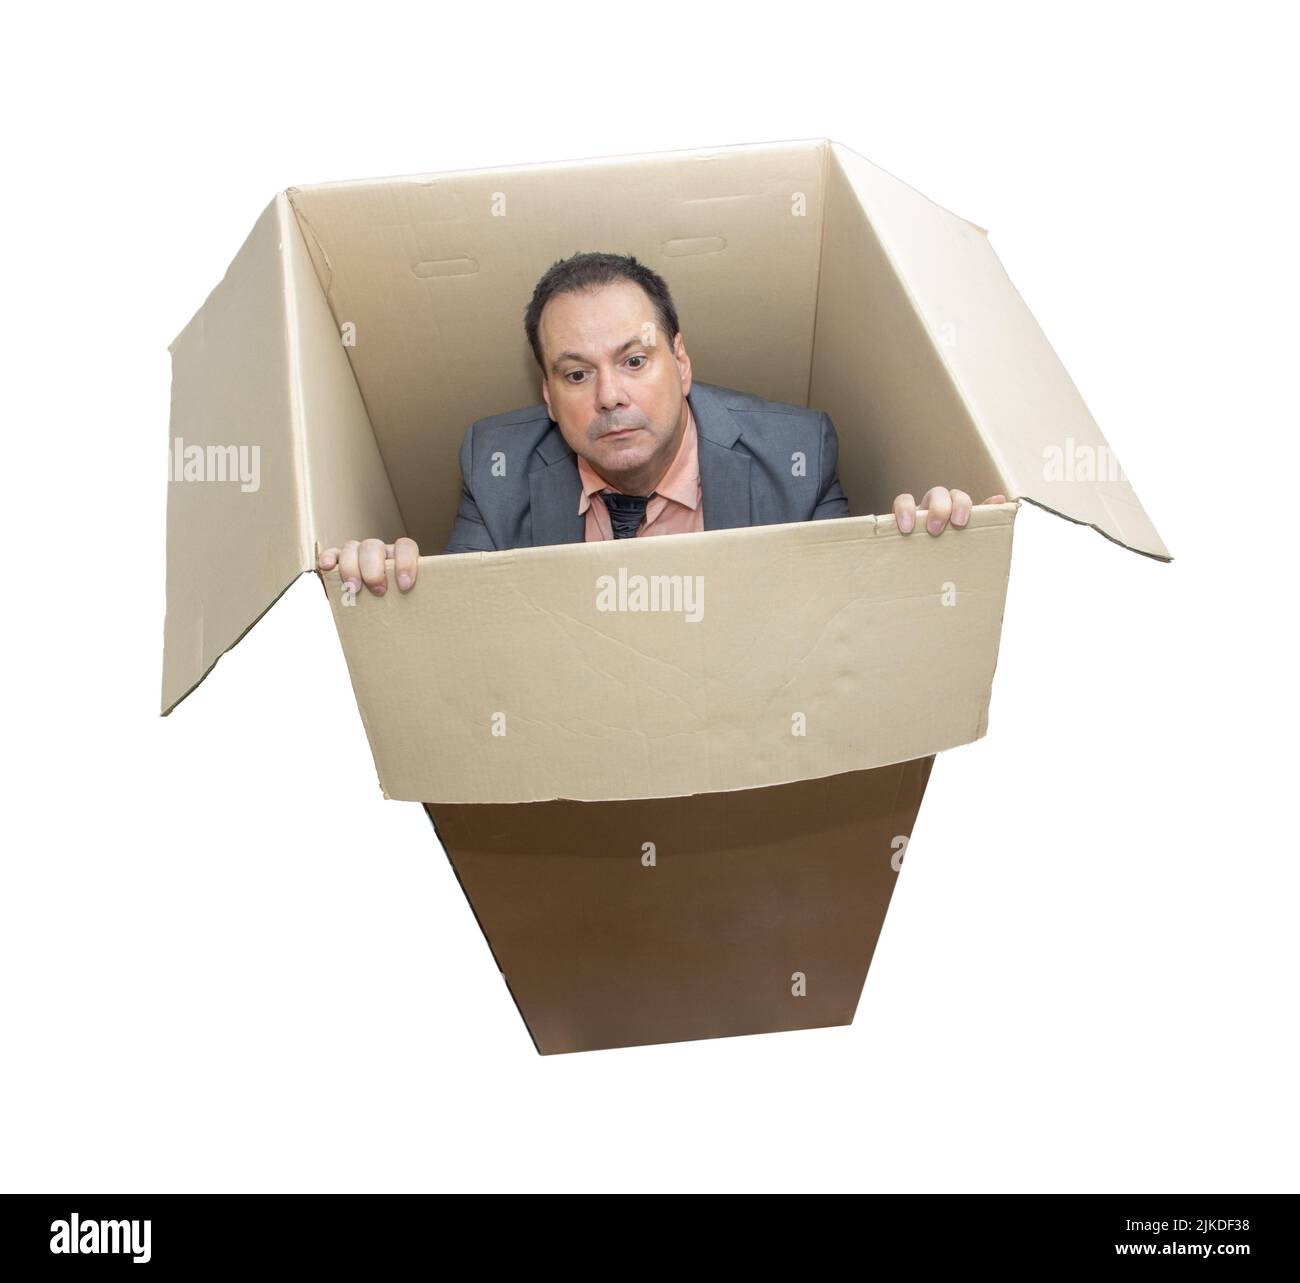 A man in a suit stands inside a cardboard box and tries to look out, isolated on white background Stock Photo